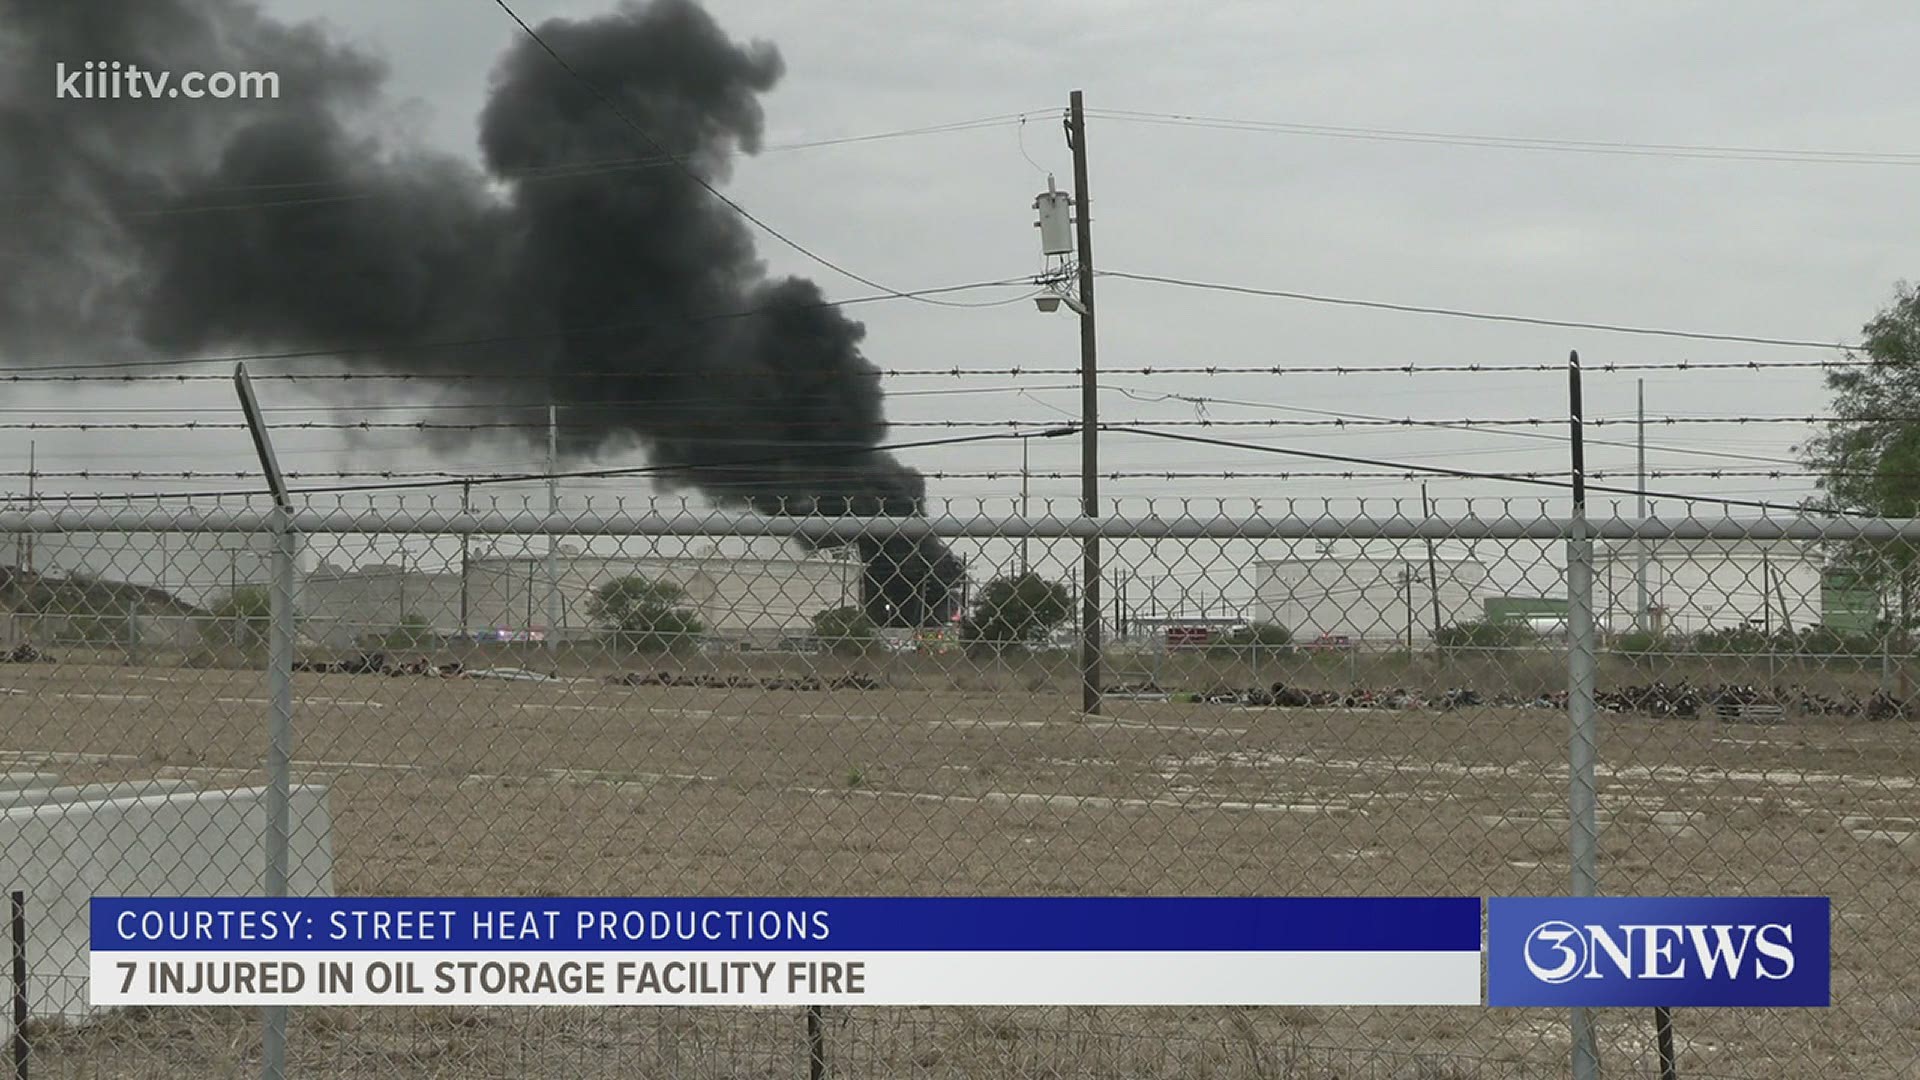 Officials with Magellan report that the fire started near an above ground tank holding light crude oil. It was being cleaned and inspected.